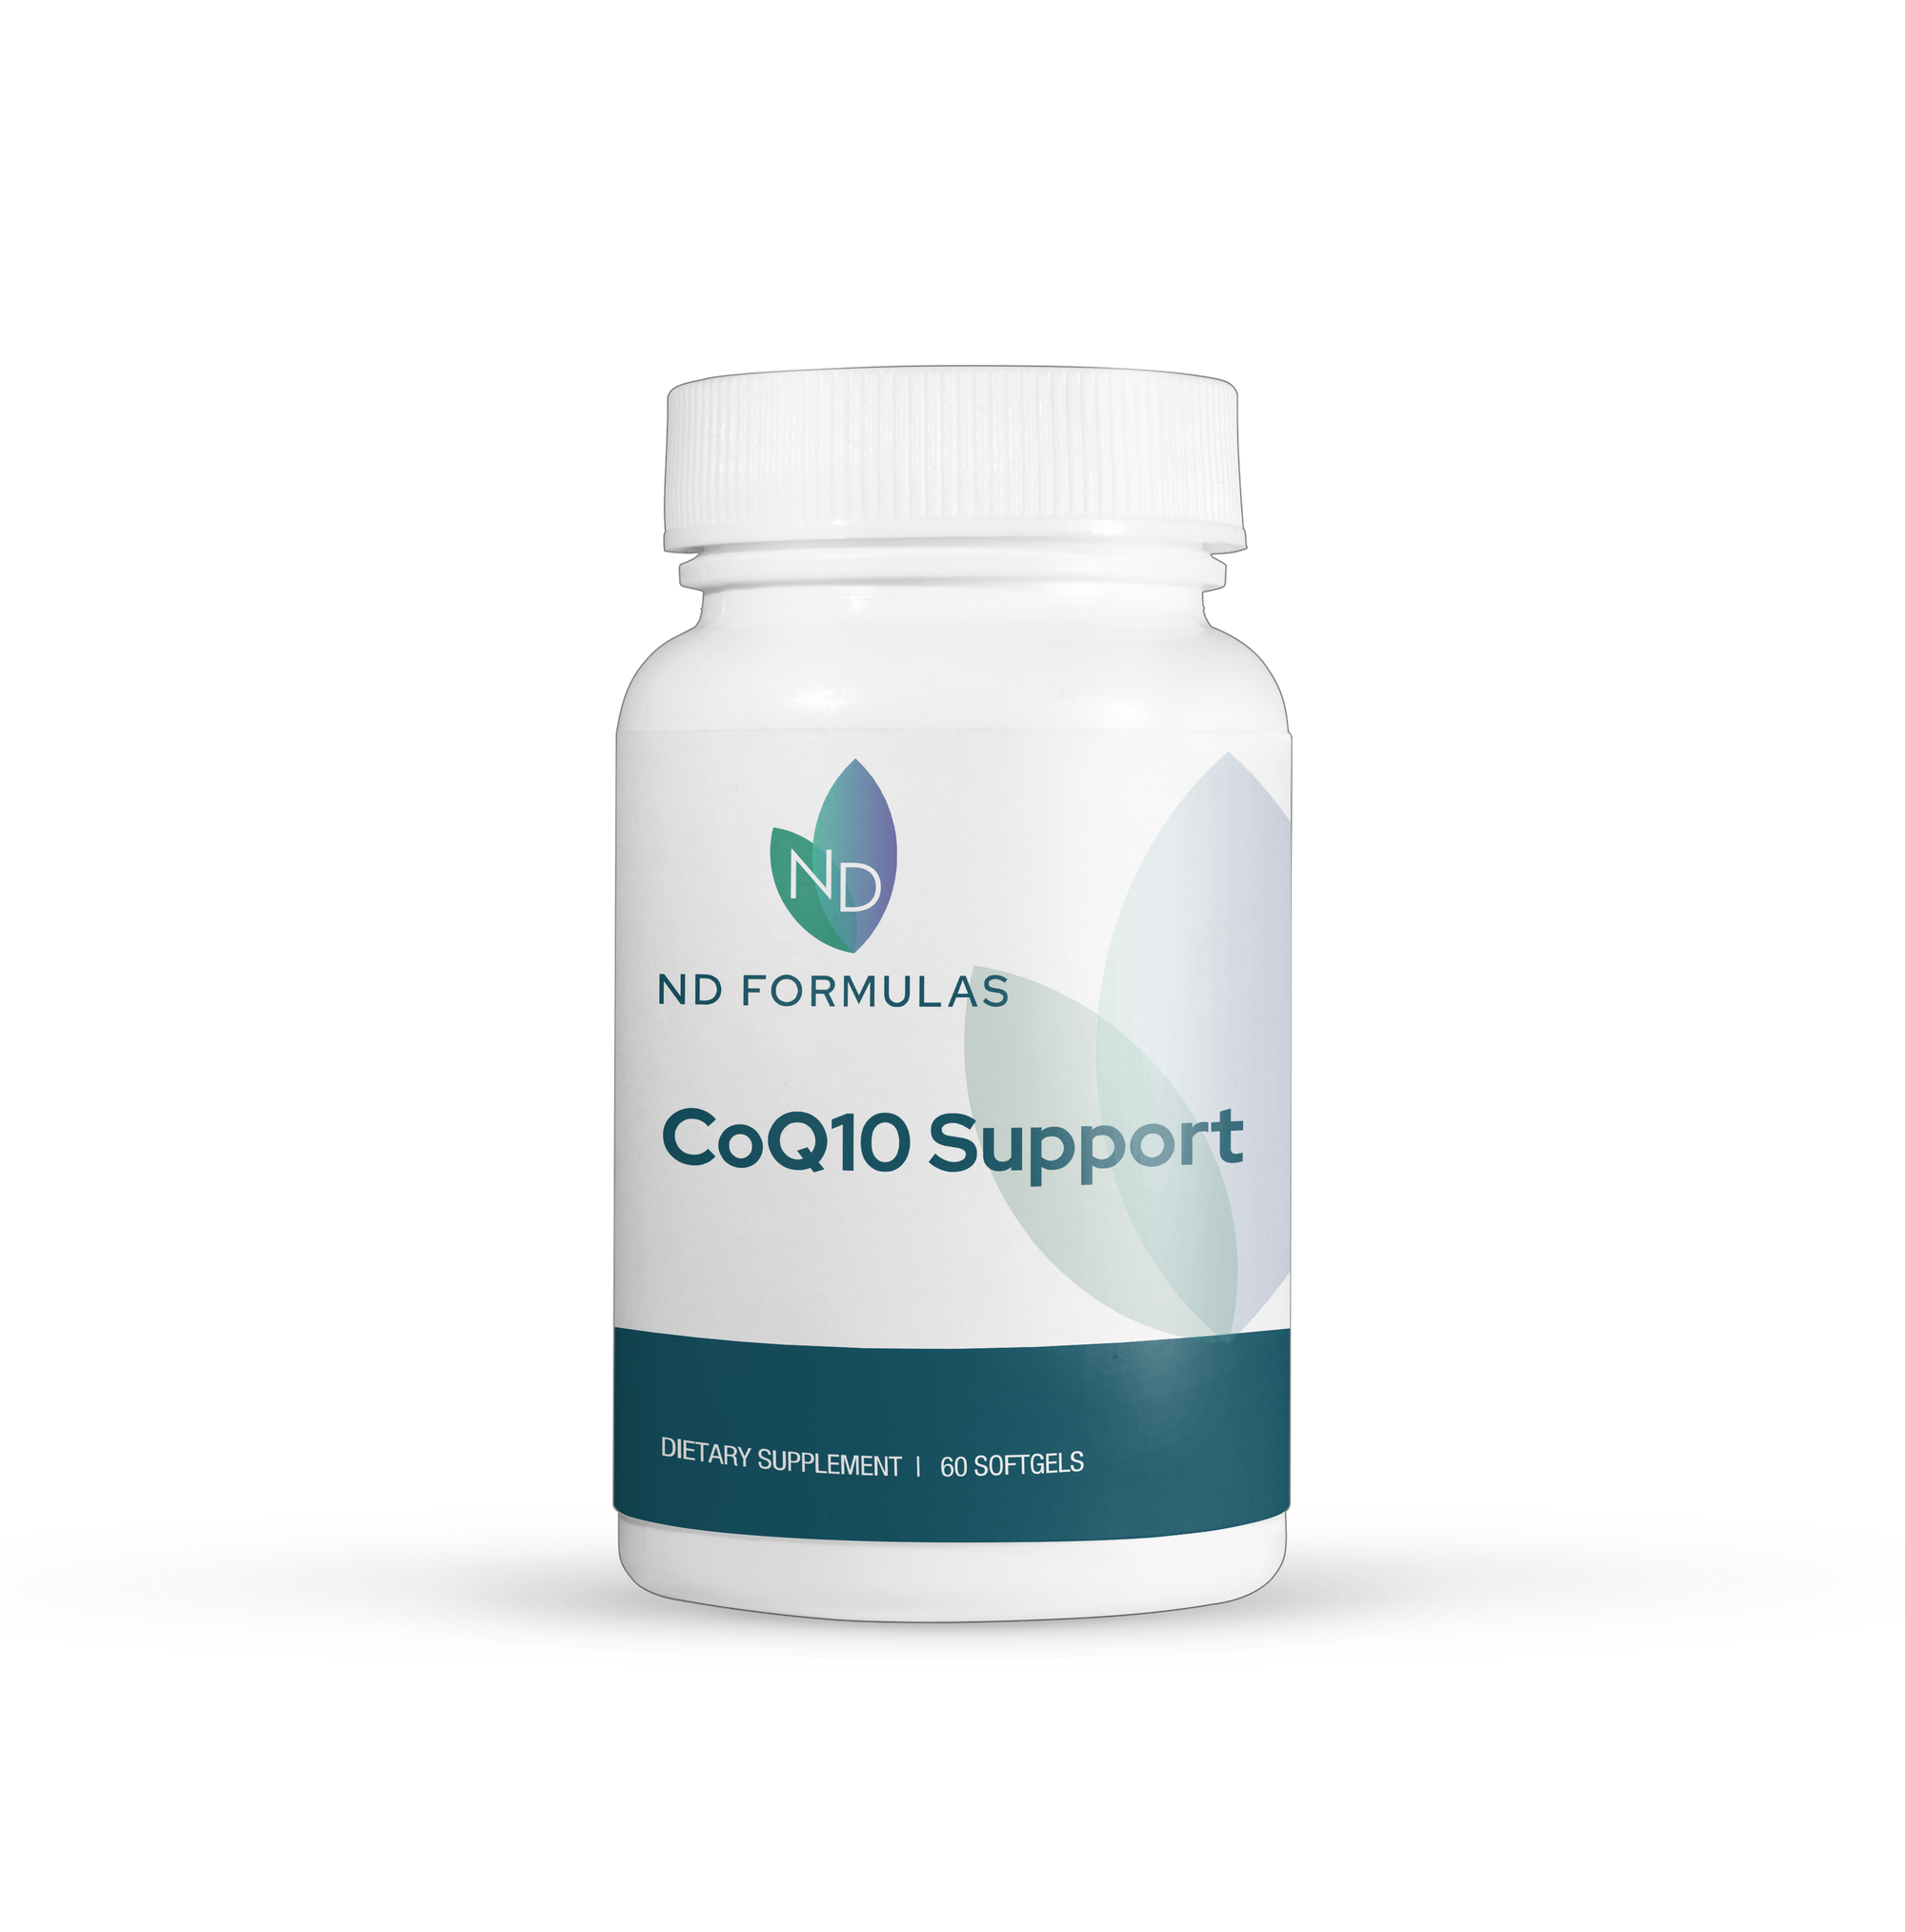 CoQ10 Support